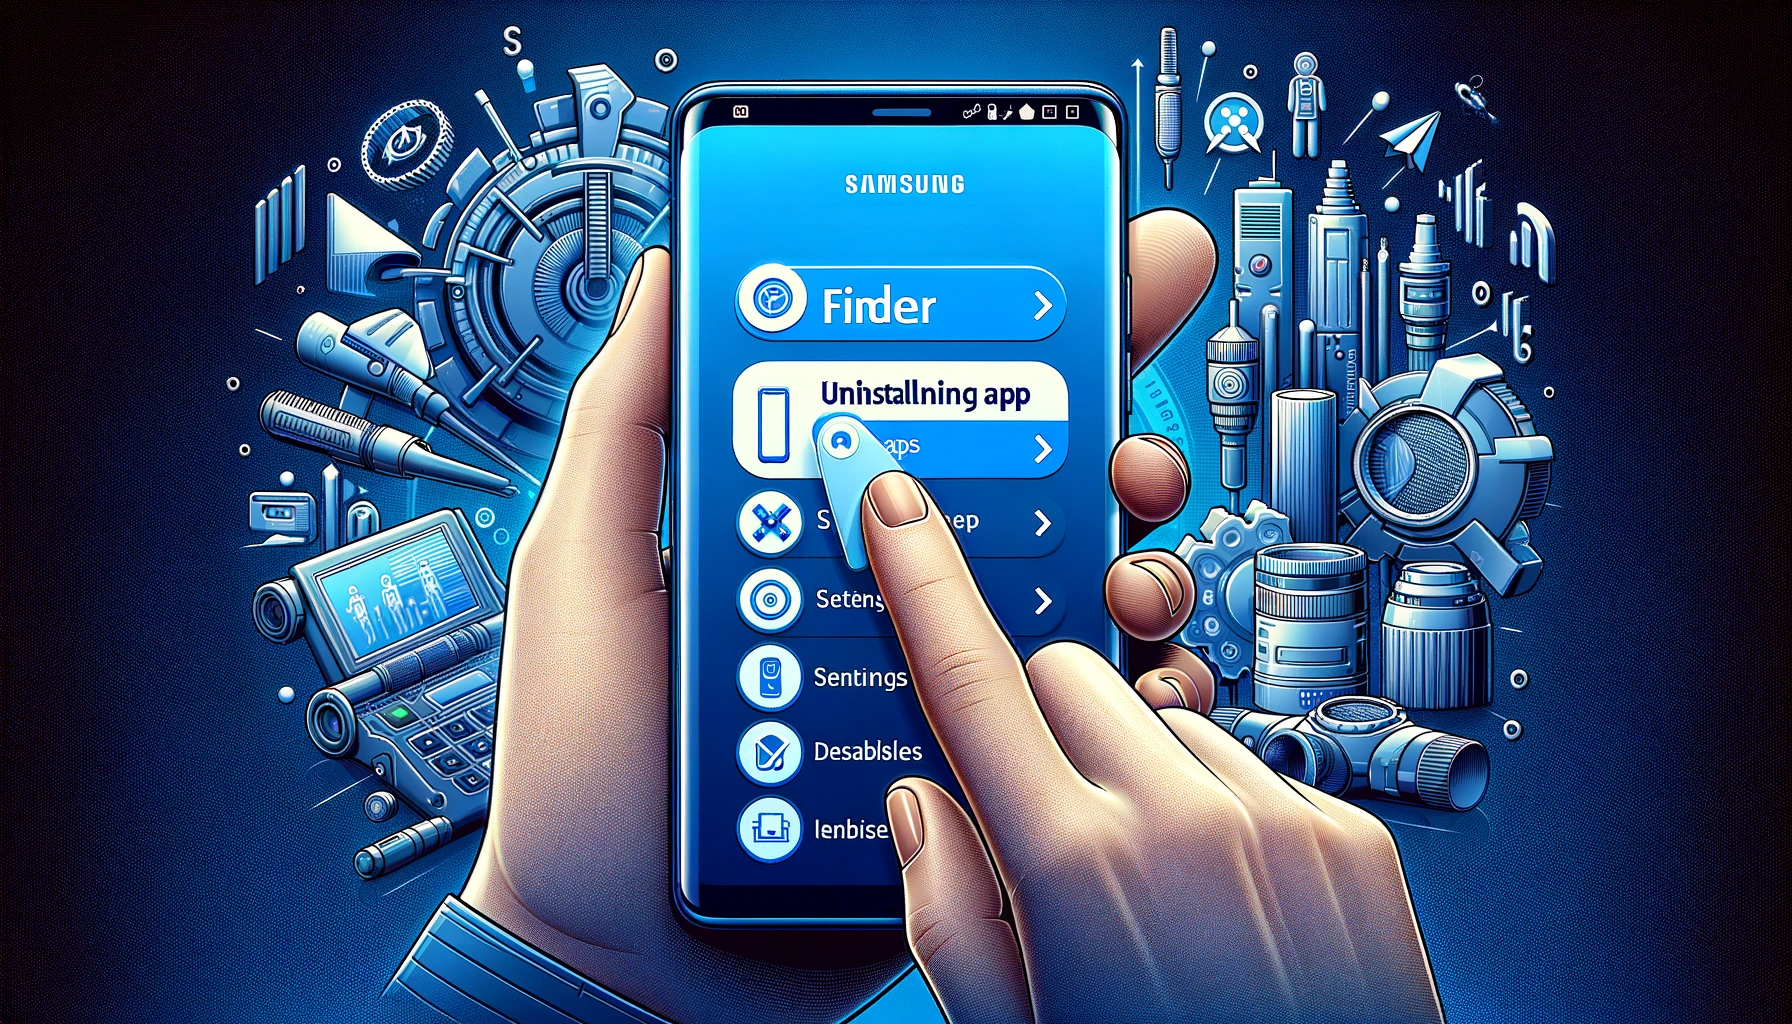 How to Remove Finder App on Samsung